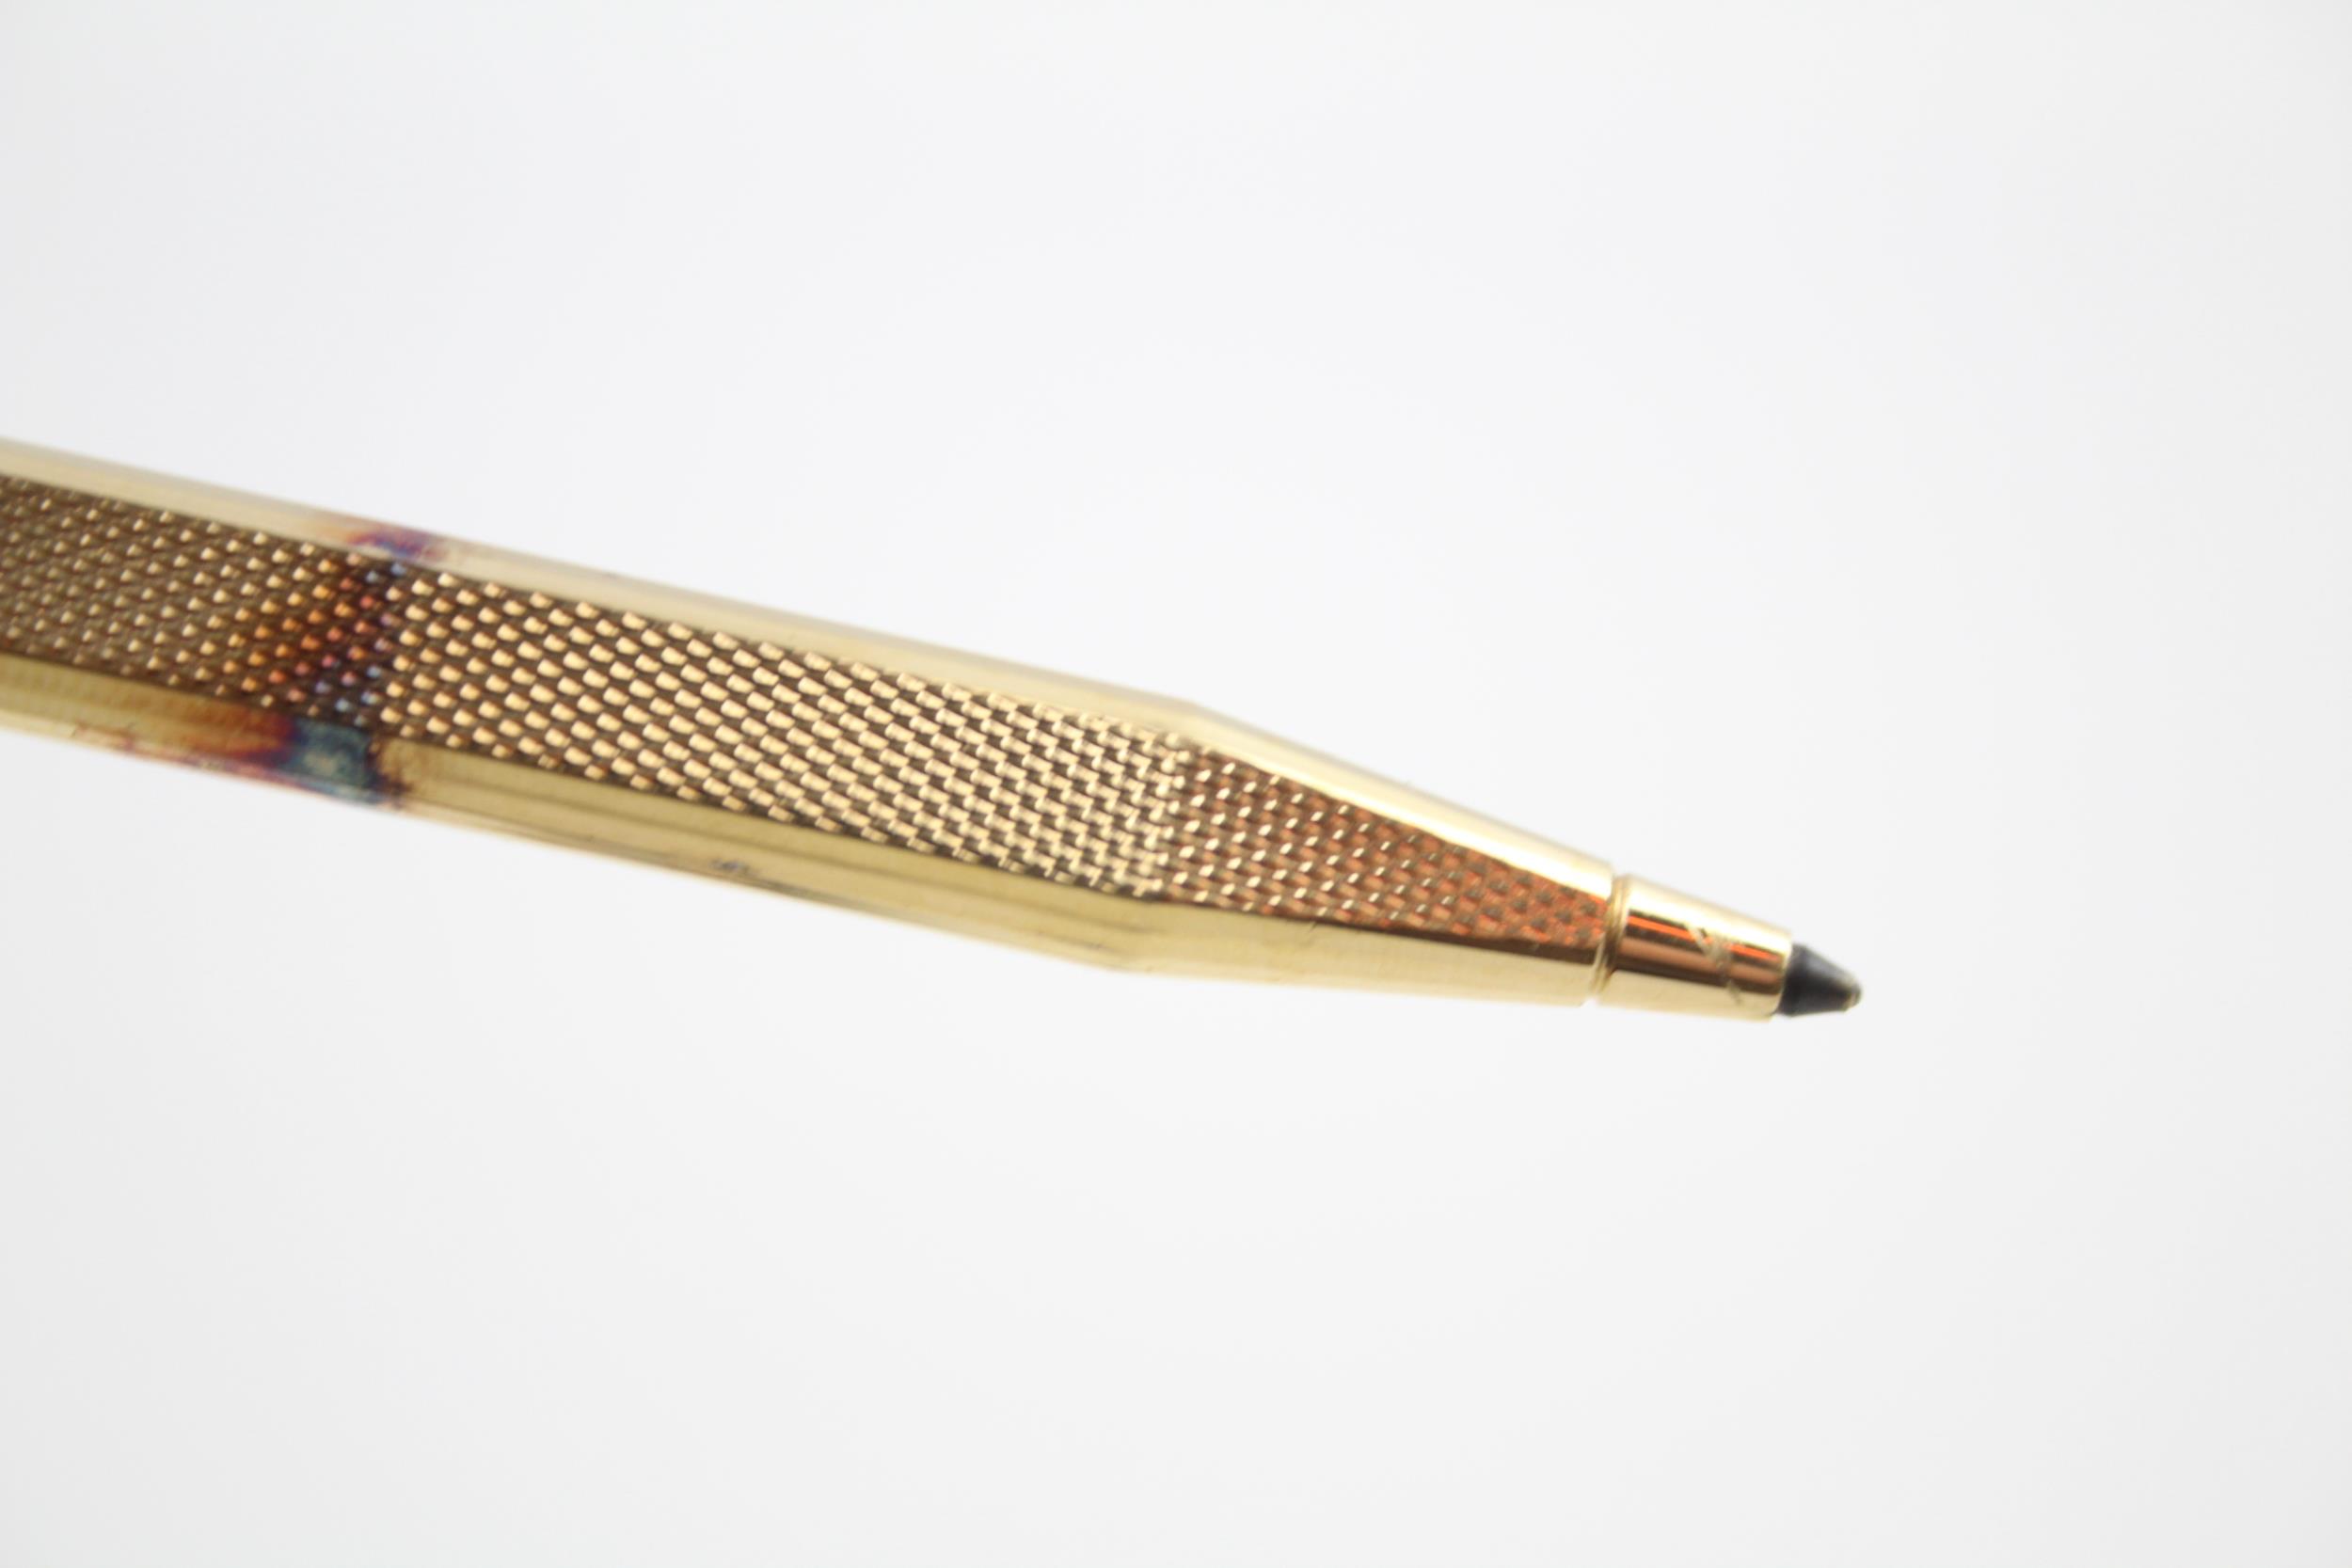 Vintage DUNHILL Gold Plated Ballpoint Biro Pen w/ .925 Sterling Silver Cap (29g) - WRITING In - Image 5 of 8